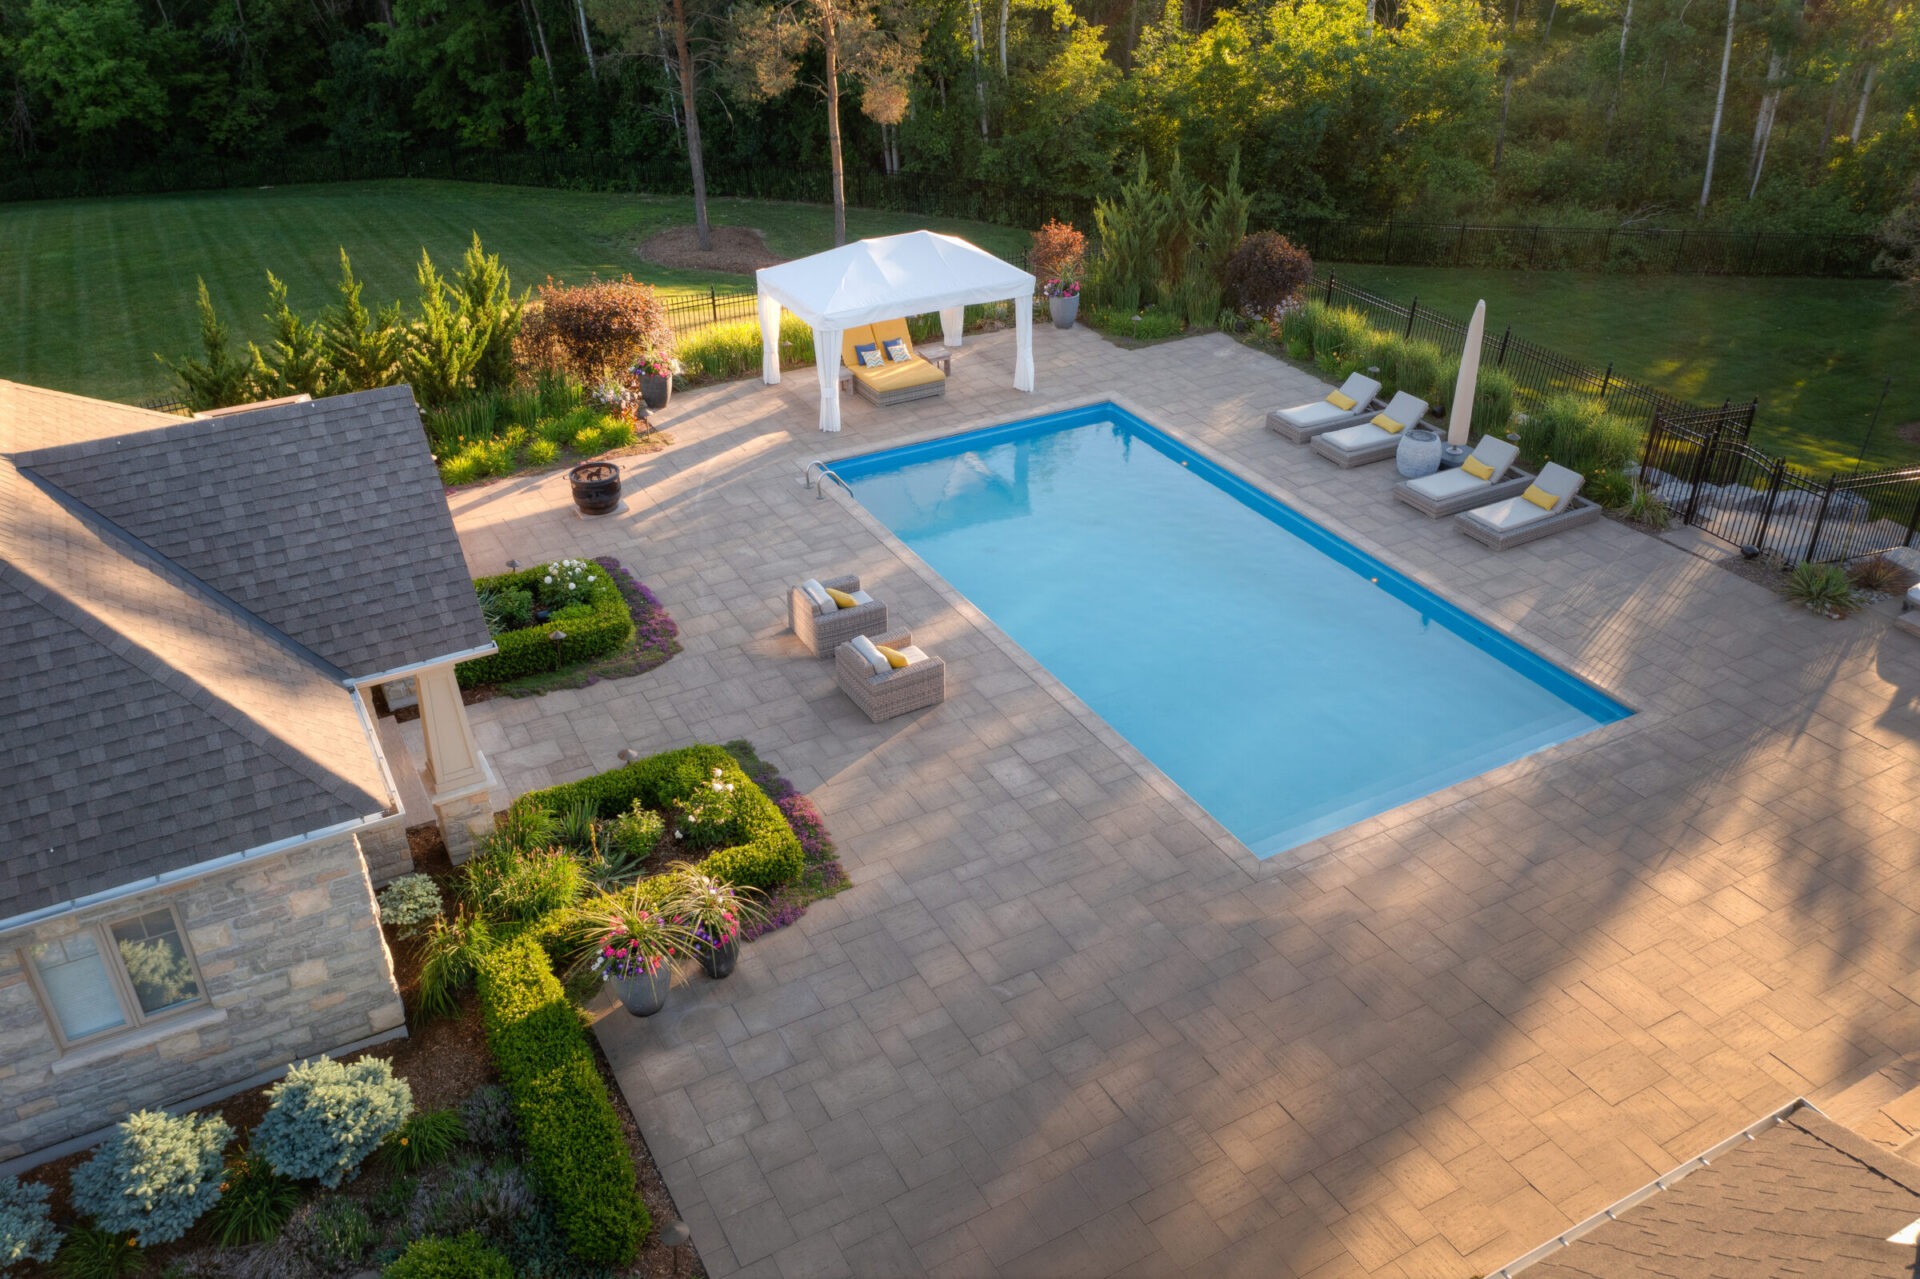 An aerial view of a backyard with a rectangular pool, patio area, sun loungers, manicured garden, and a canopy, bordered by trees at dusk.